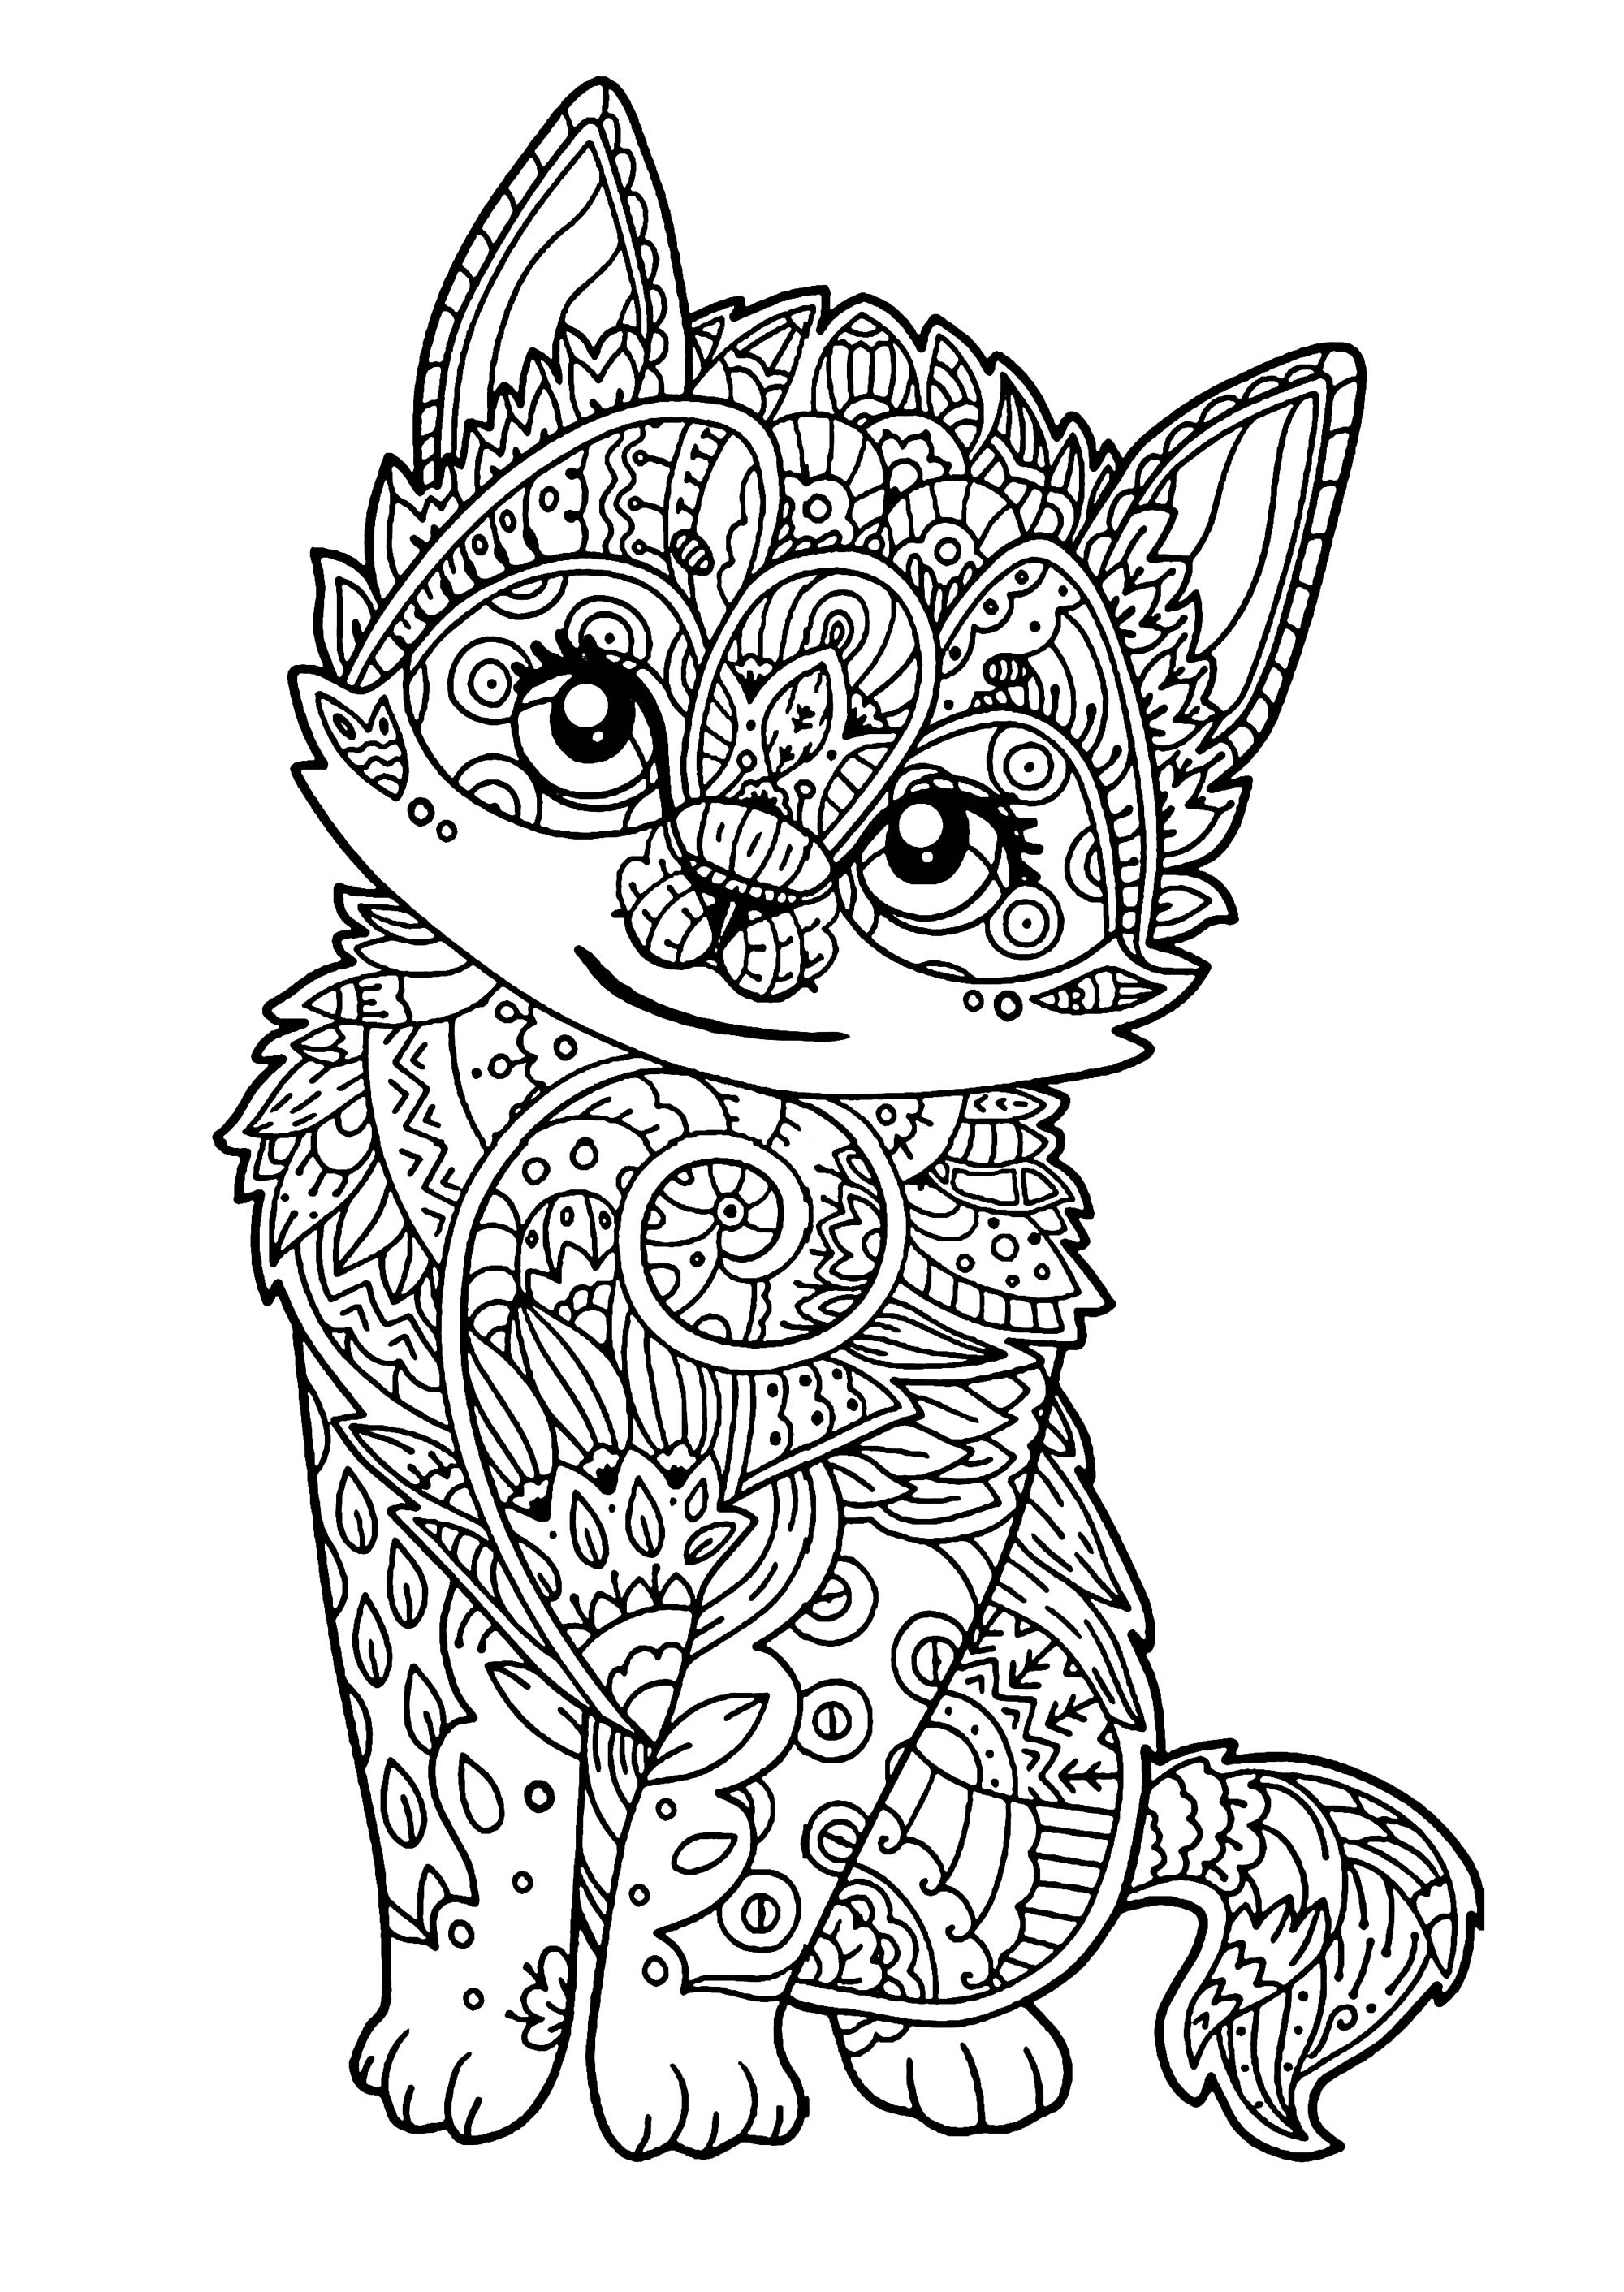 Download Coloring Page Free Printable Cat | Coloring Page Blog